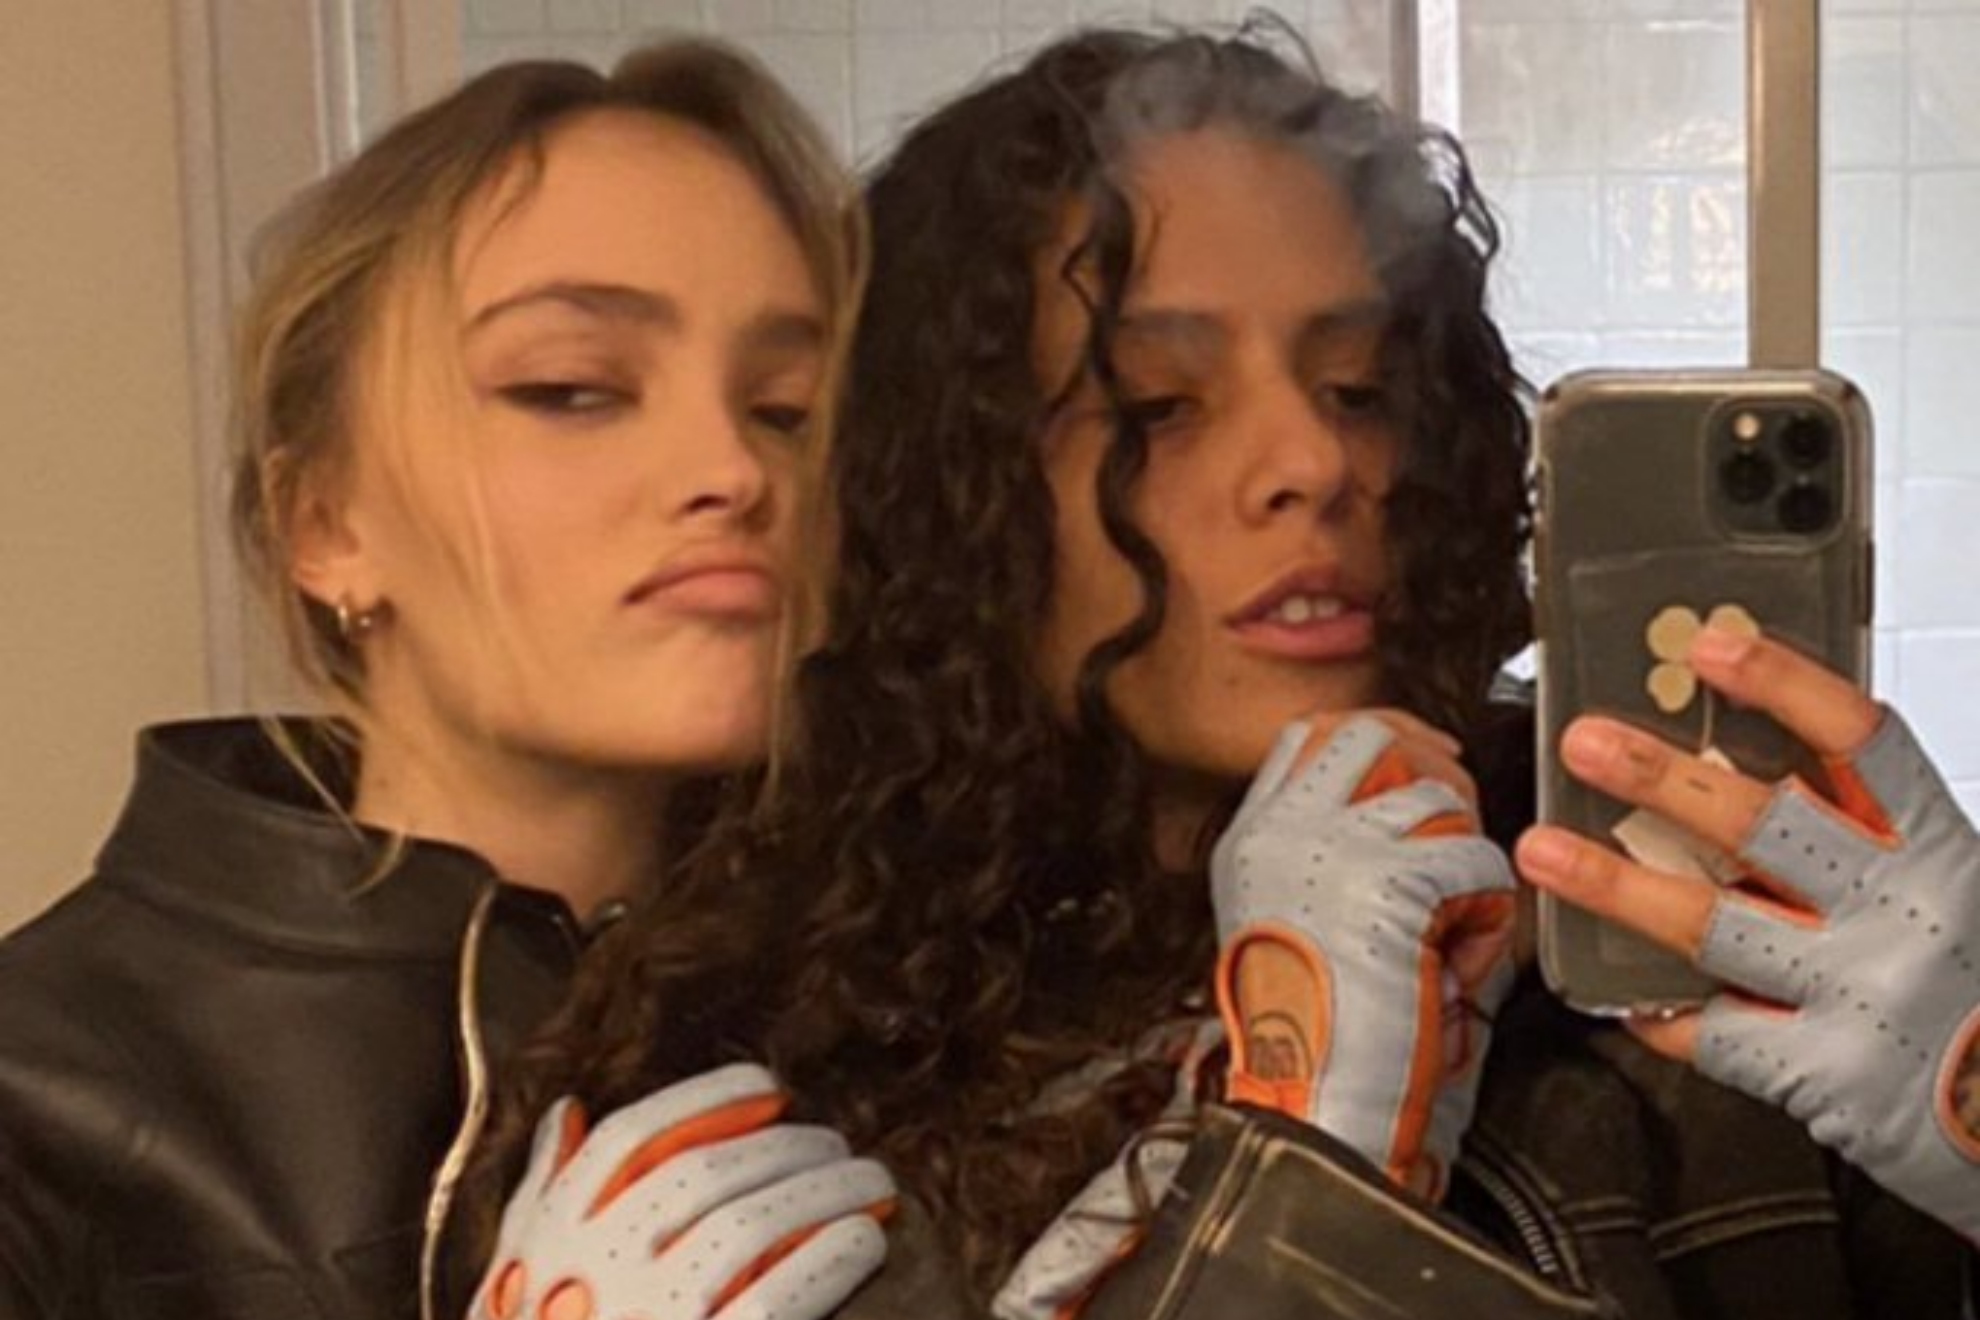 Lily-Rose Depp is spotted kissing with new girlfriend rapper 070 Shake